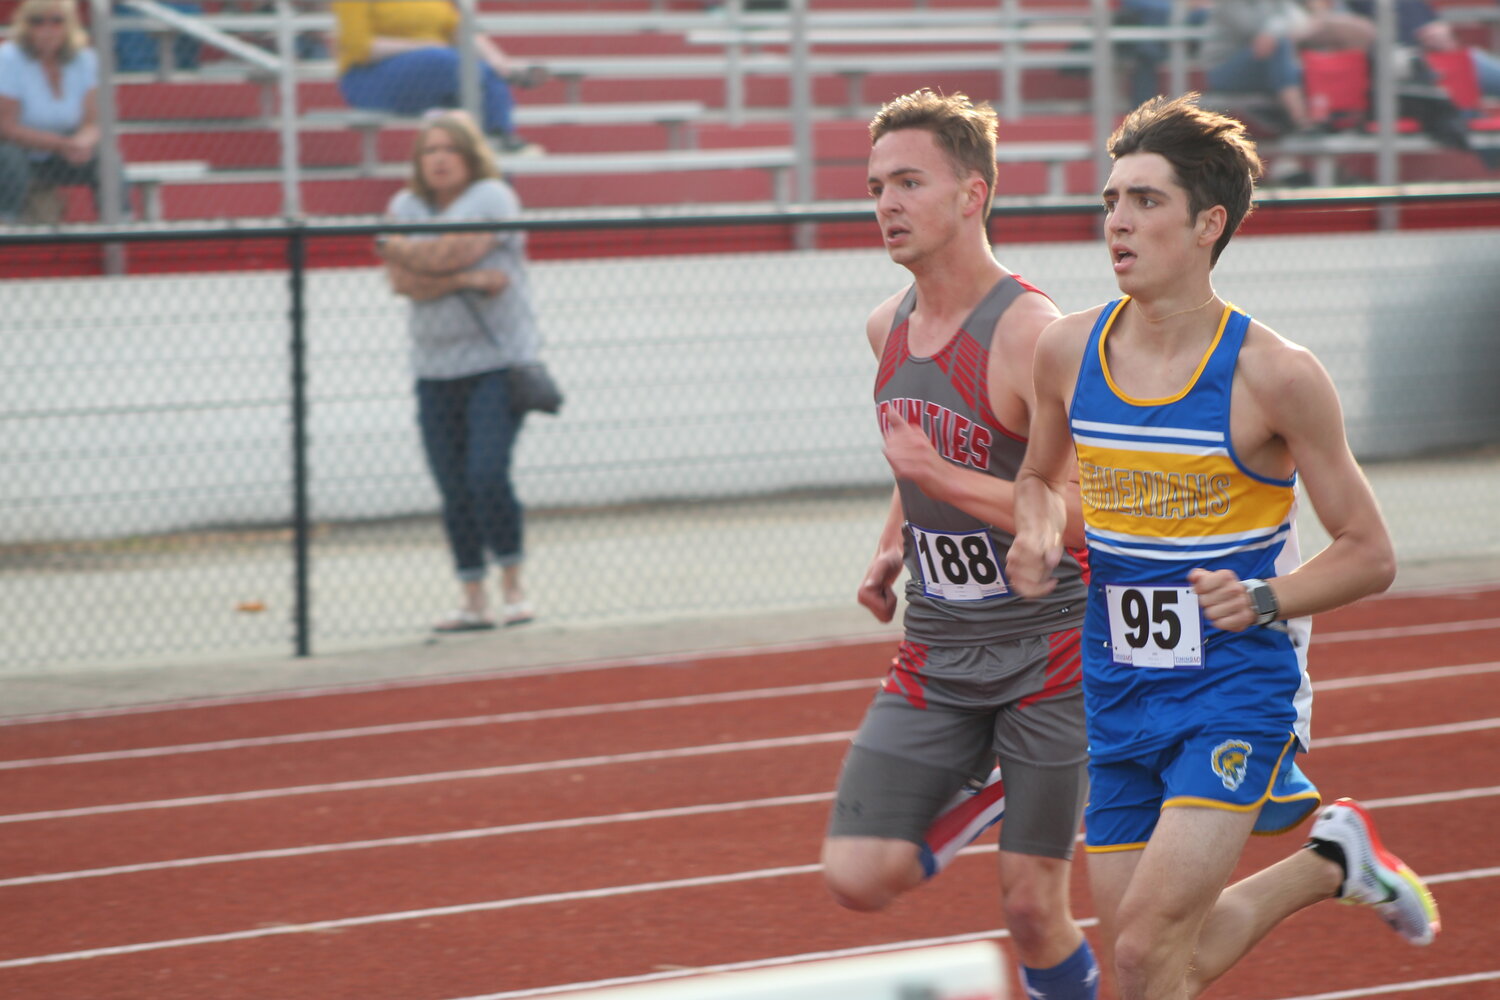 Crawfordsville's Ryan Miller and Southmont's Mason Cass go neck and neck during the 3200M run.